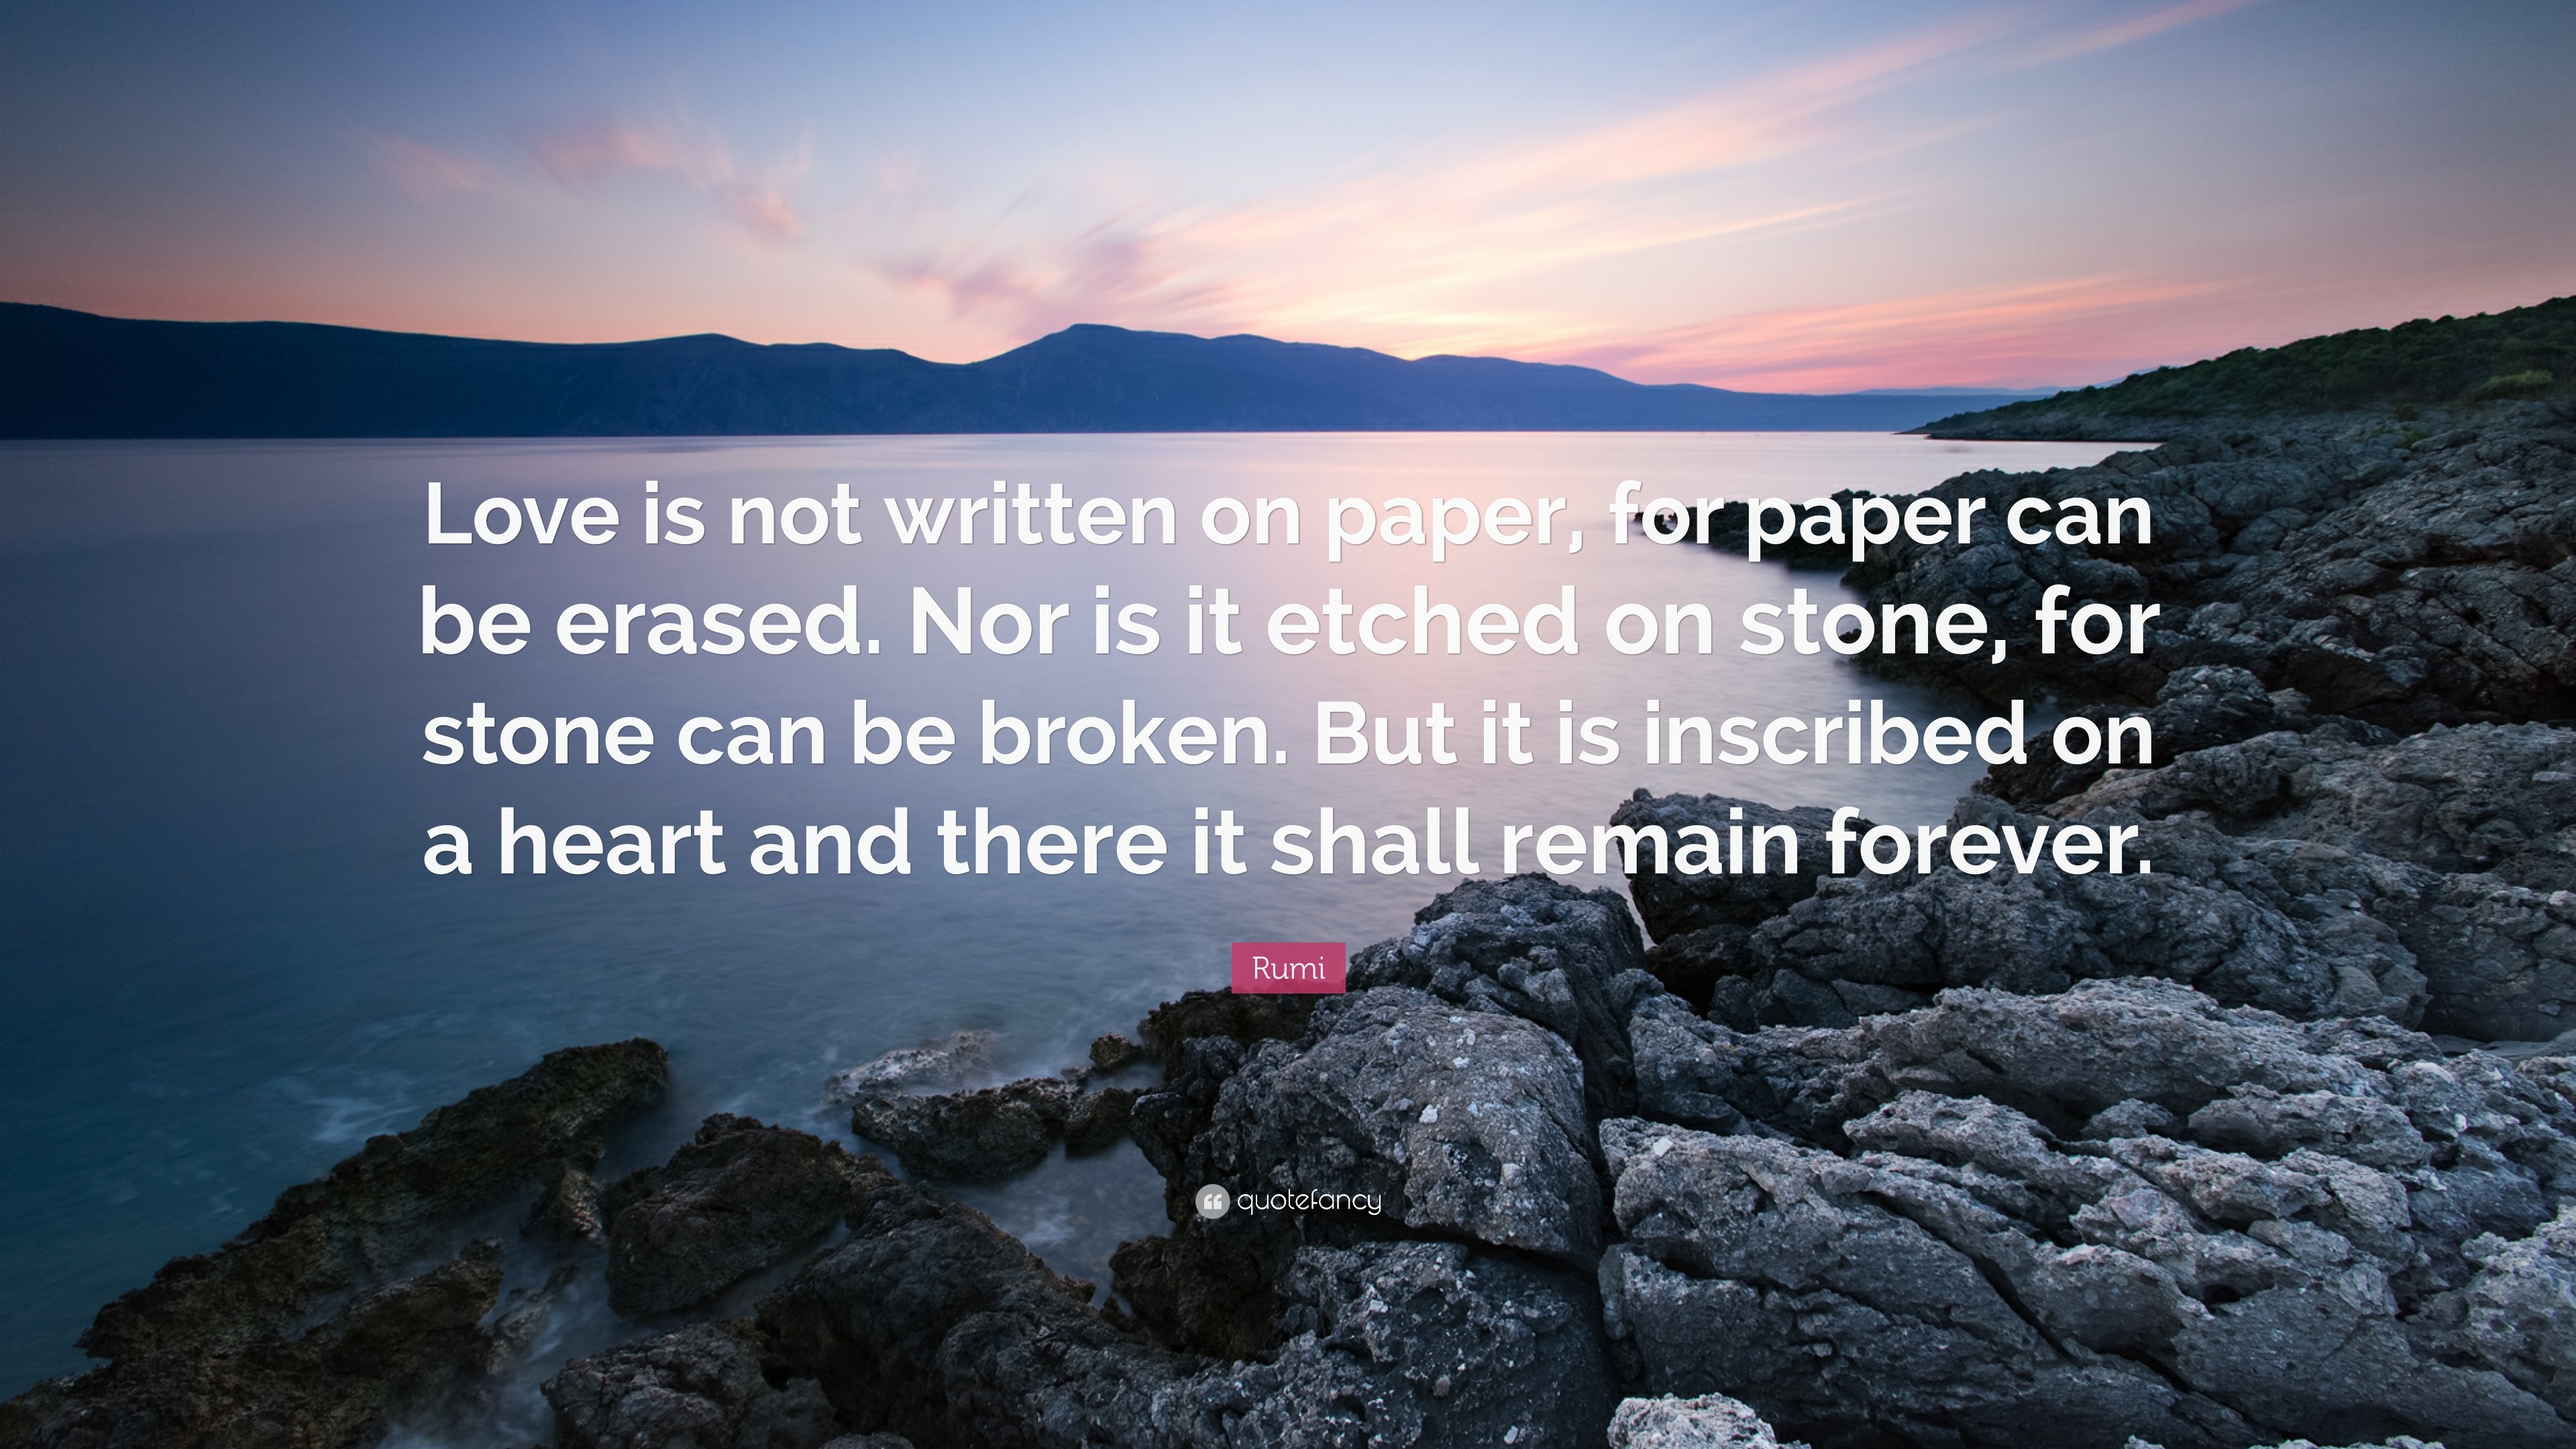 3840x2160 Rumi Quote: “Love is not written on paper, for paper can be erased